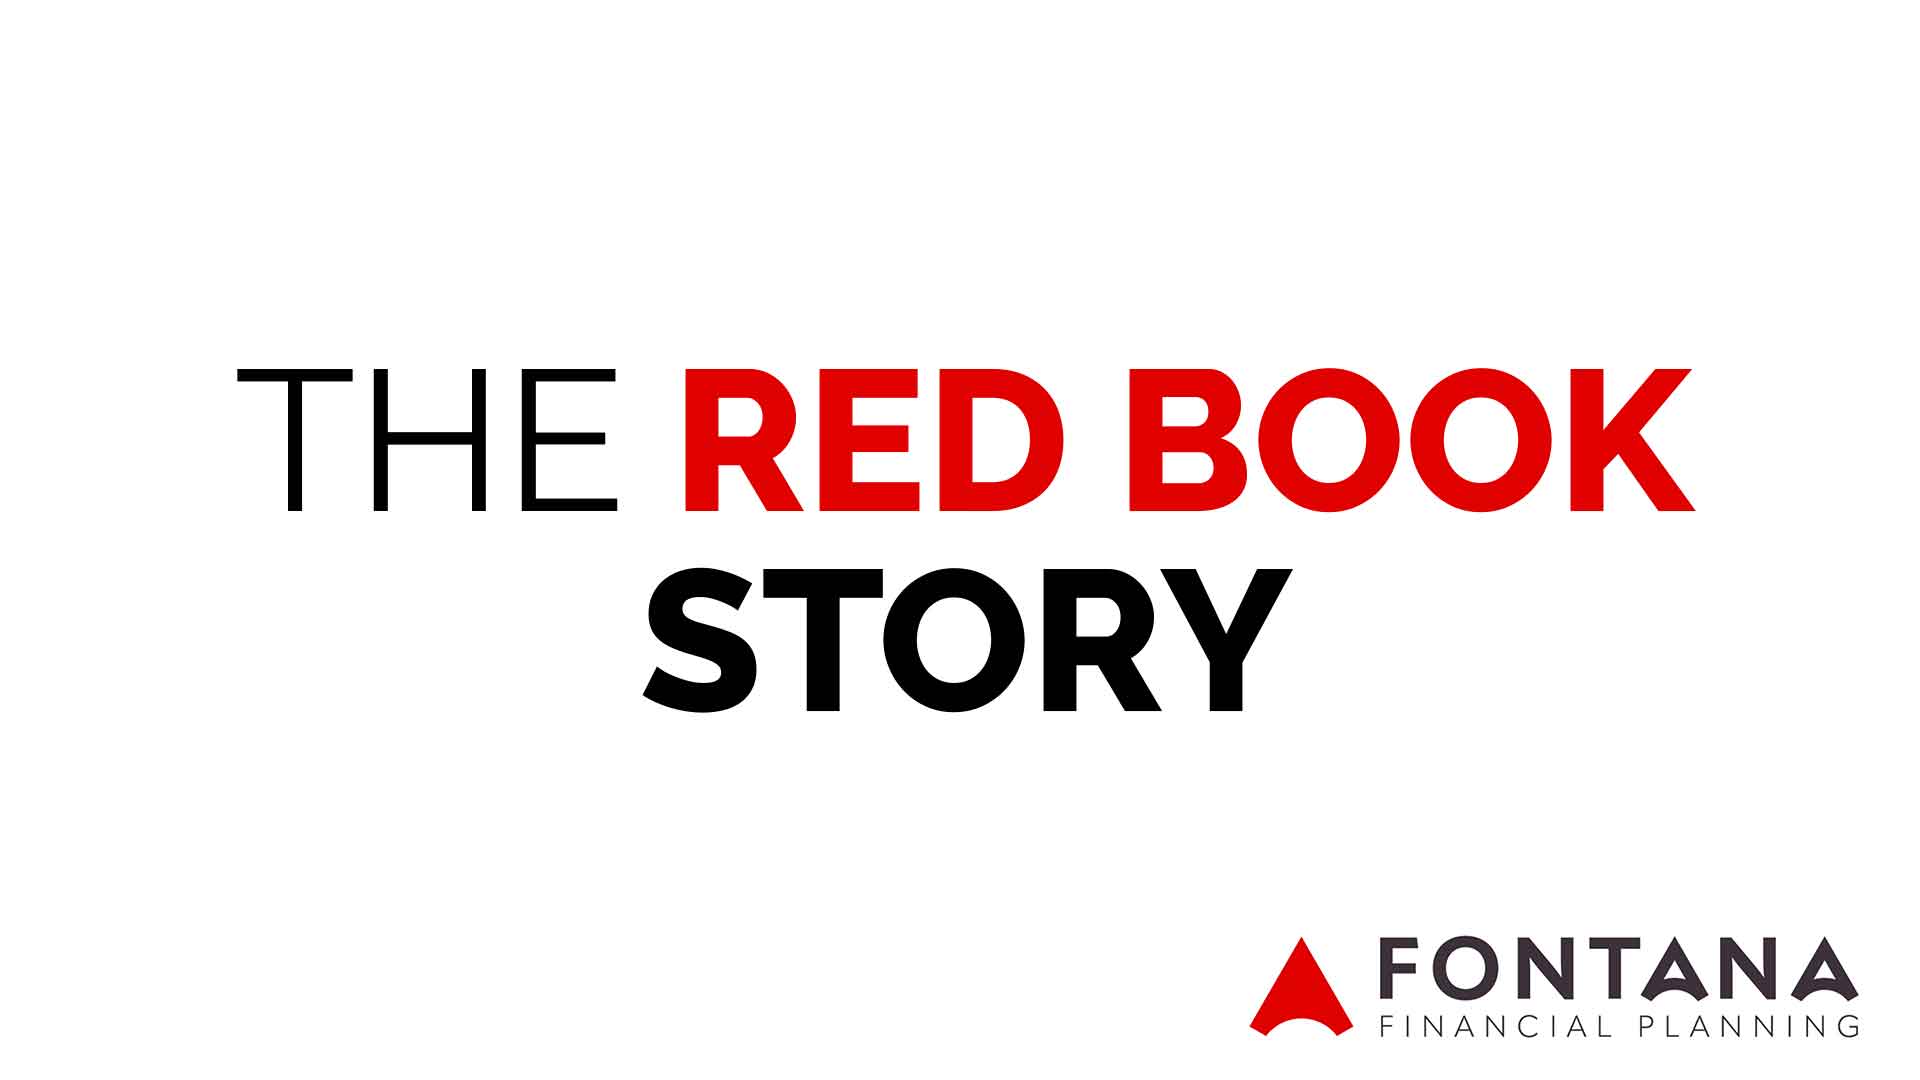 The Red Book Story